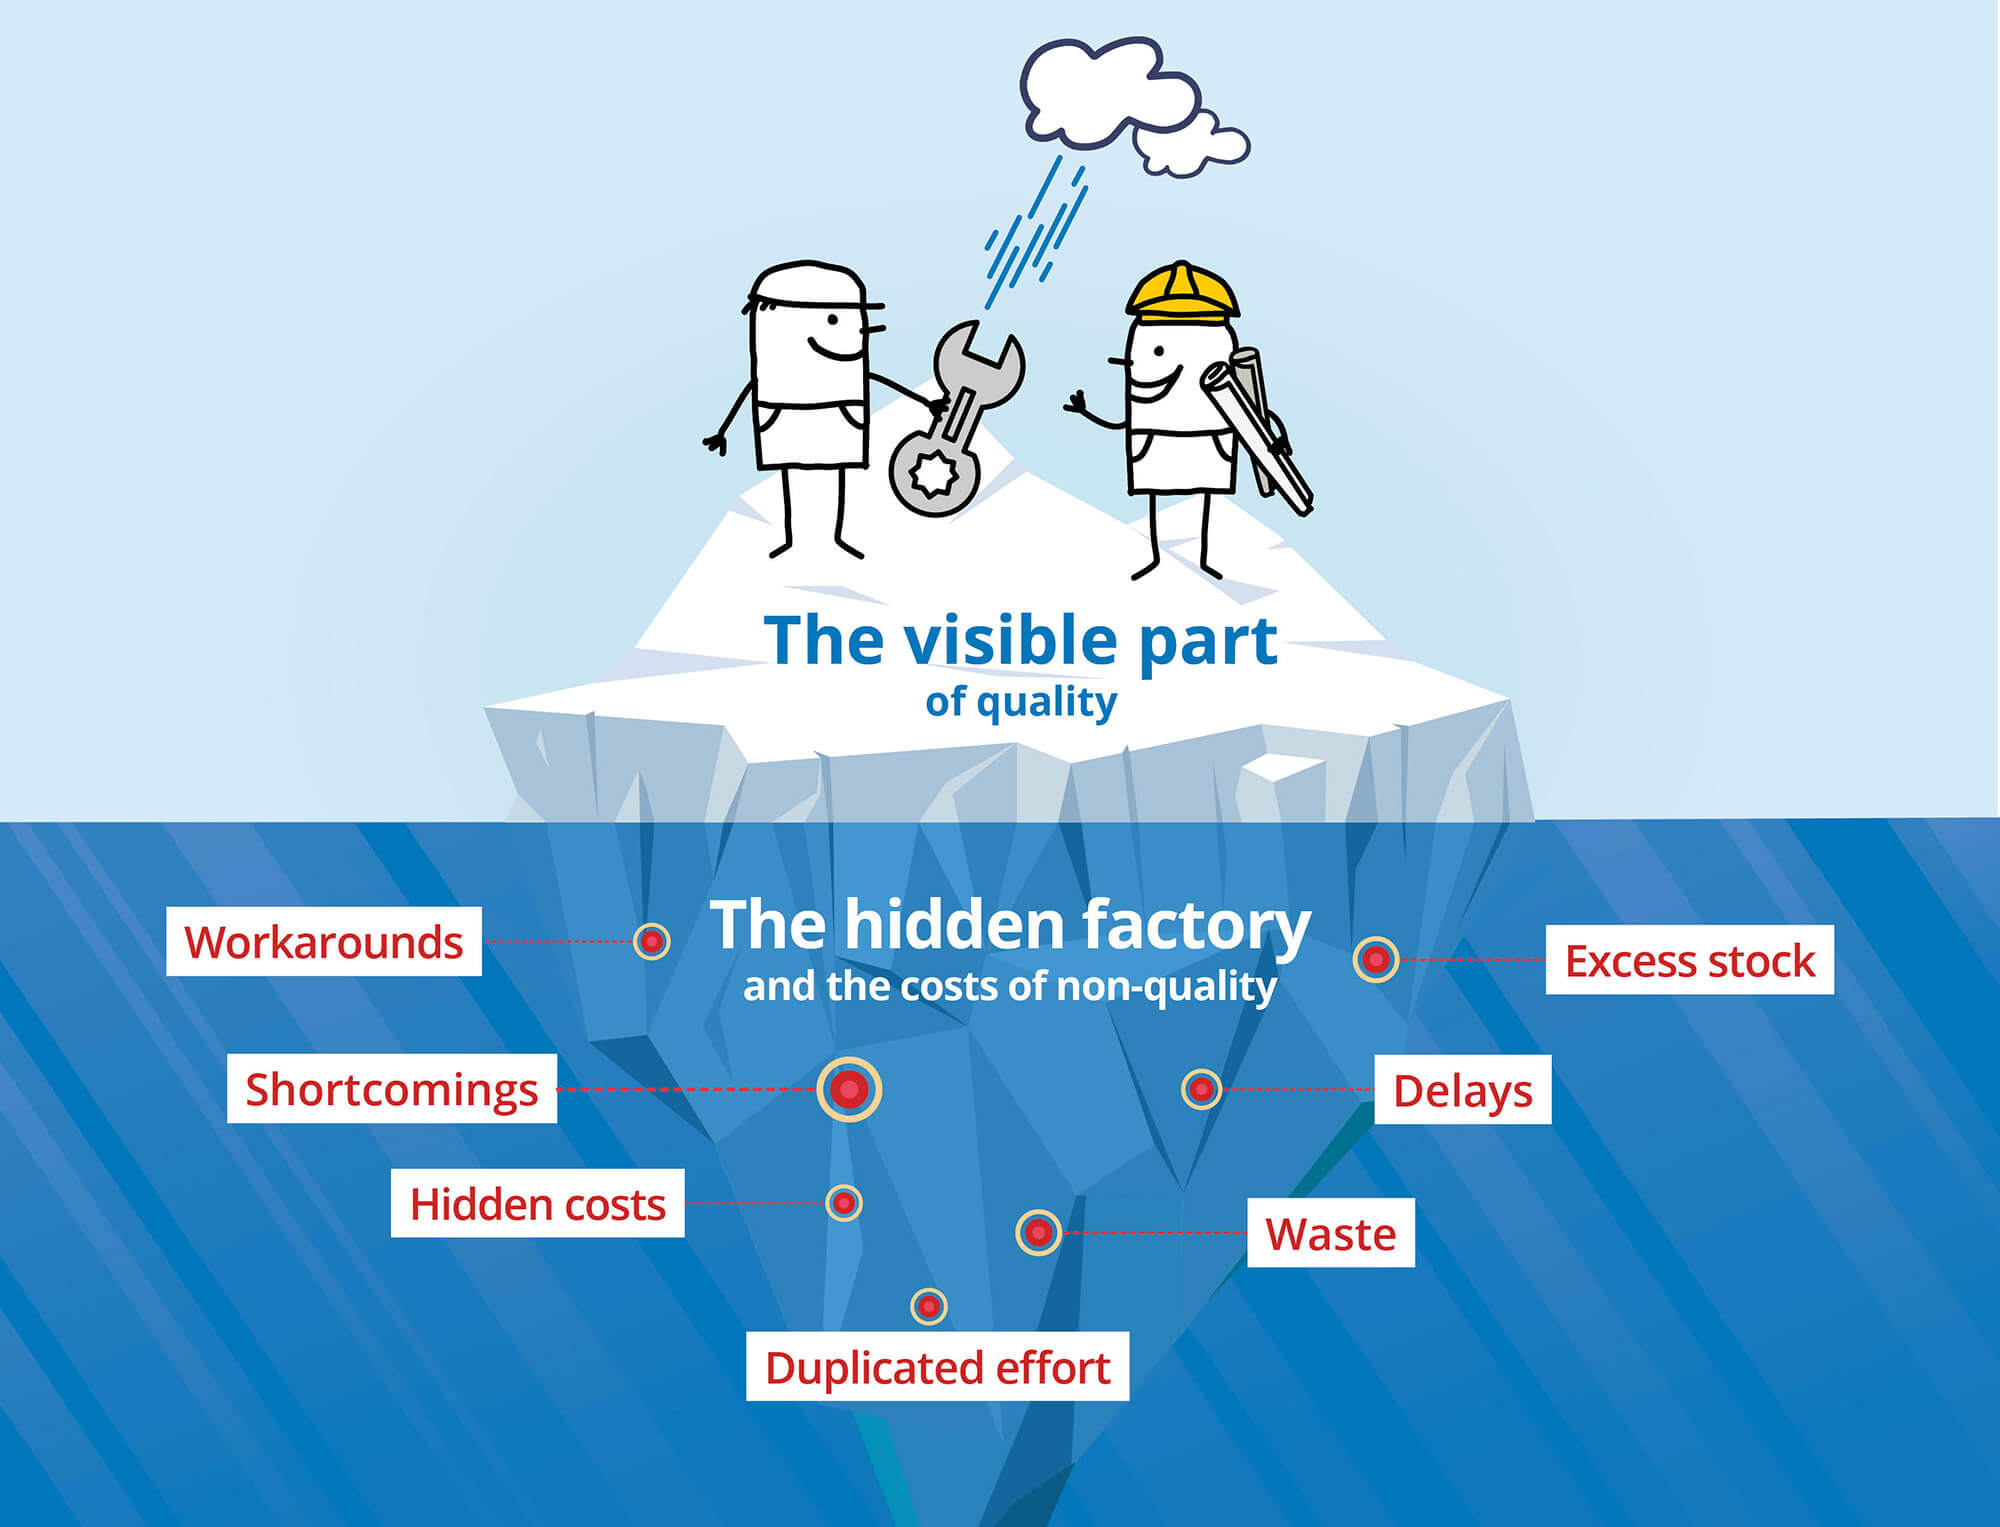 The definition of hidden factory as an infographic